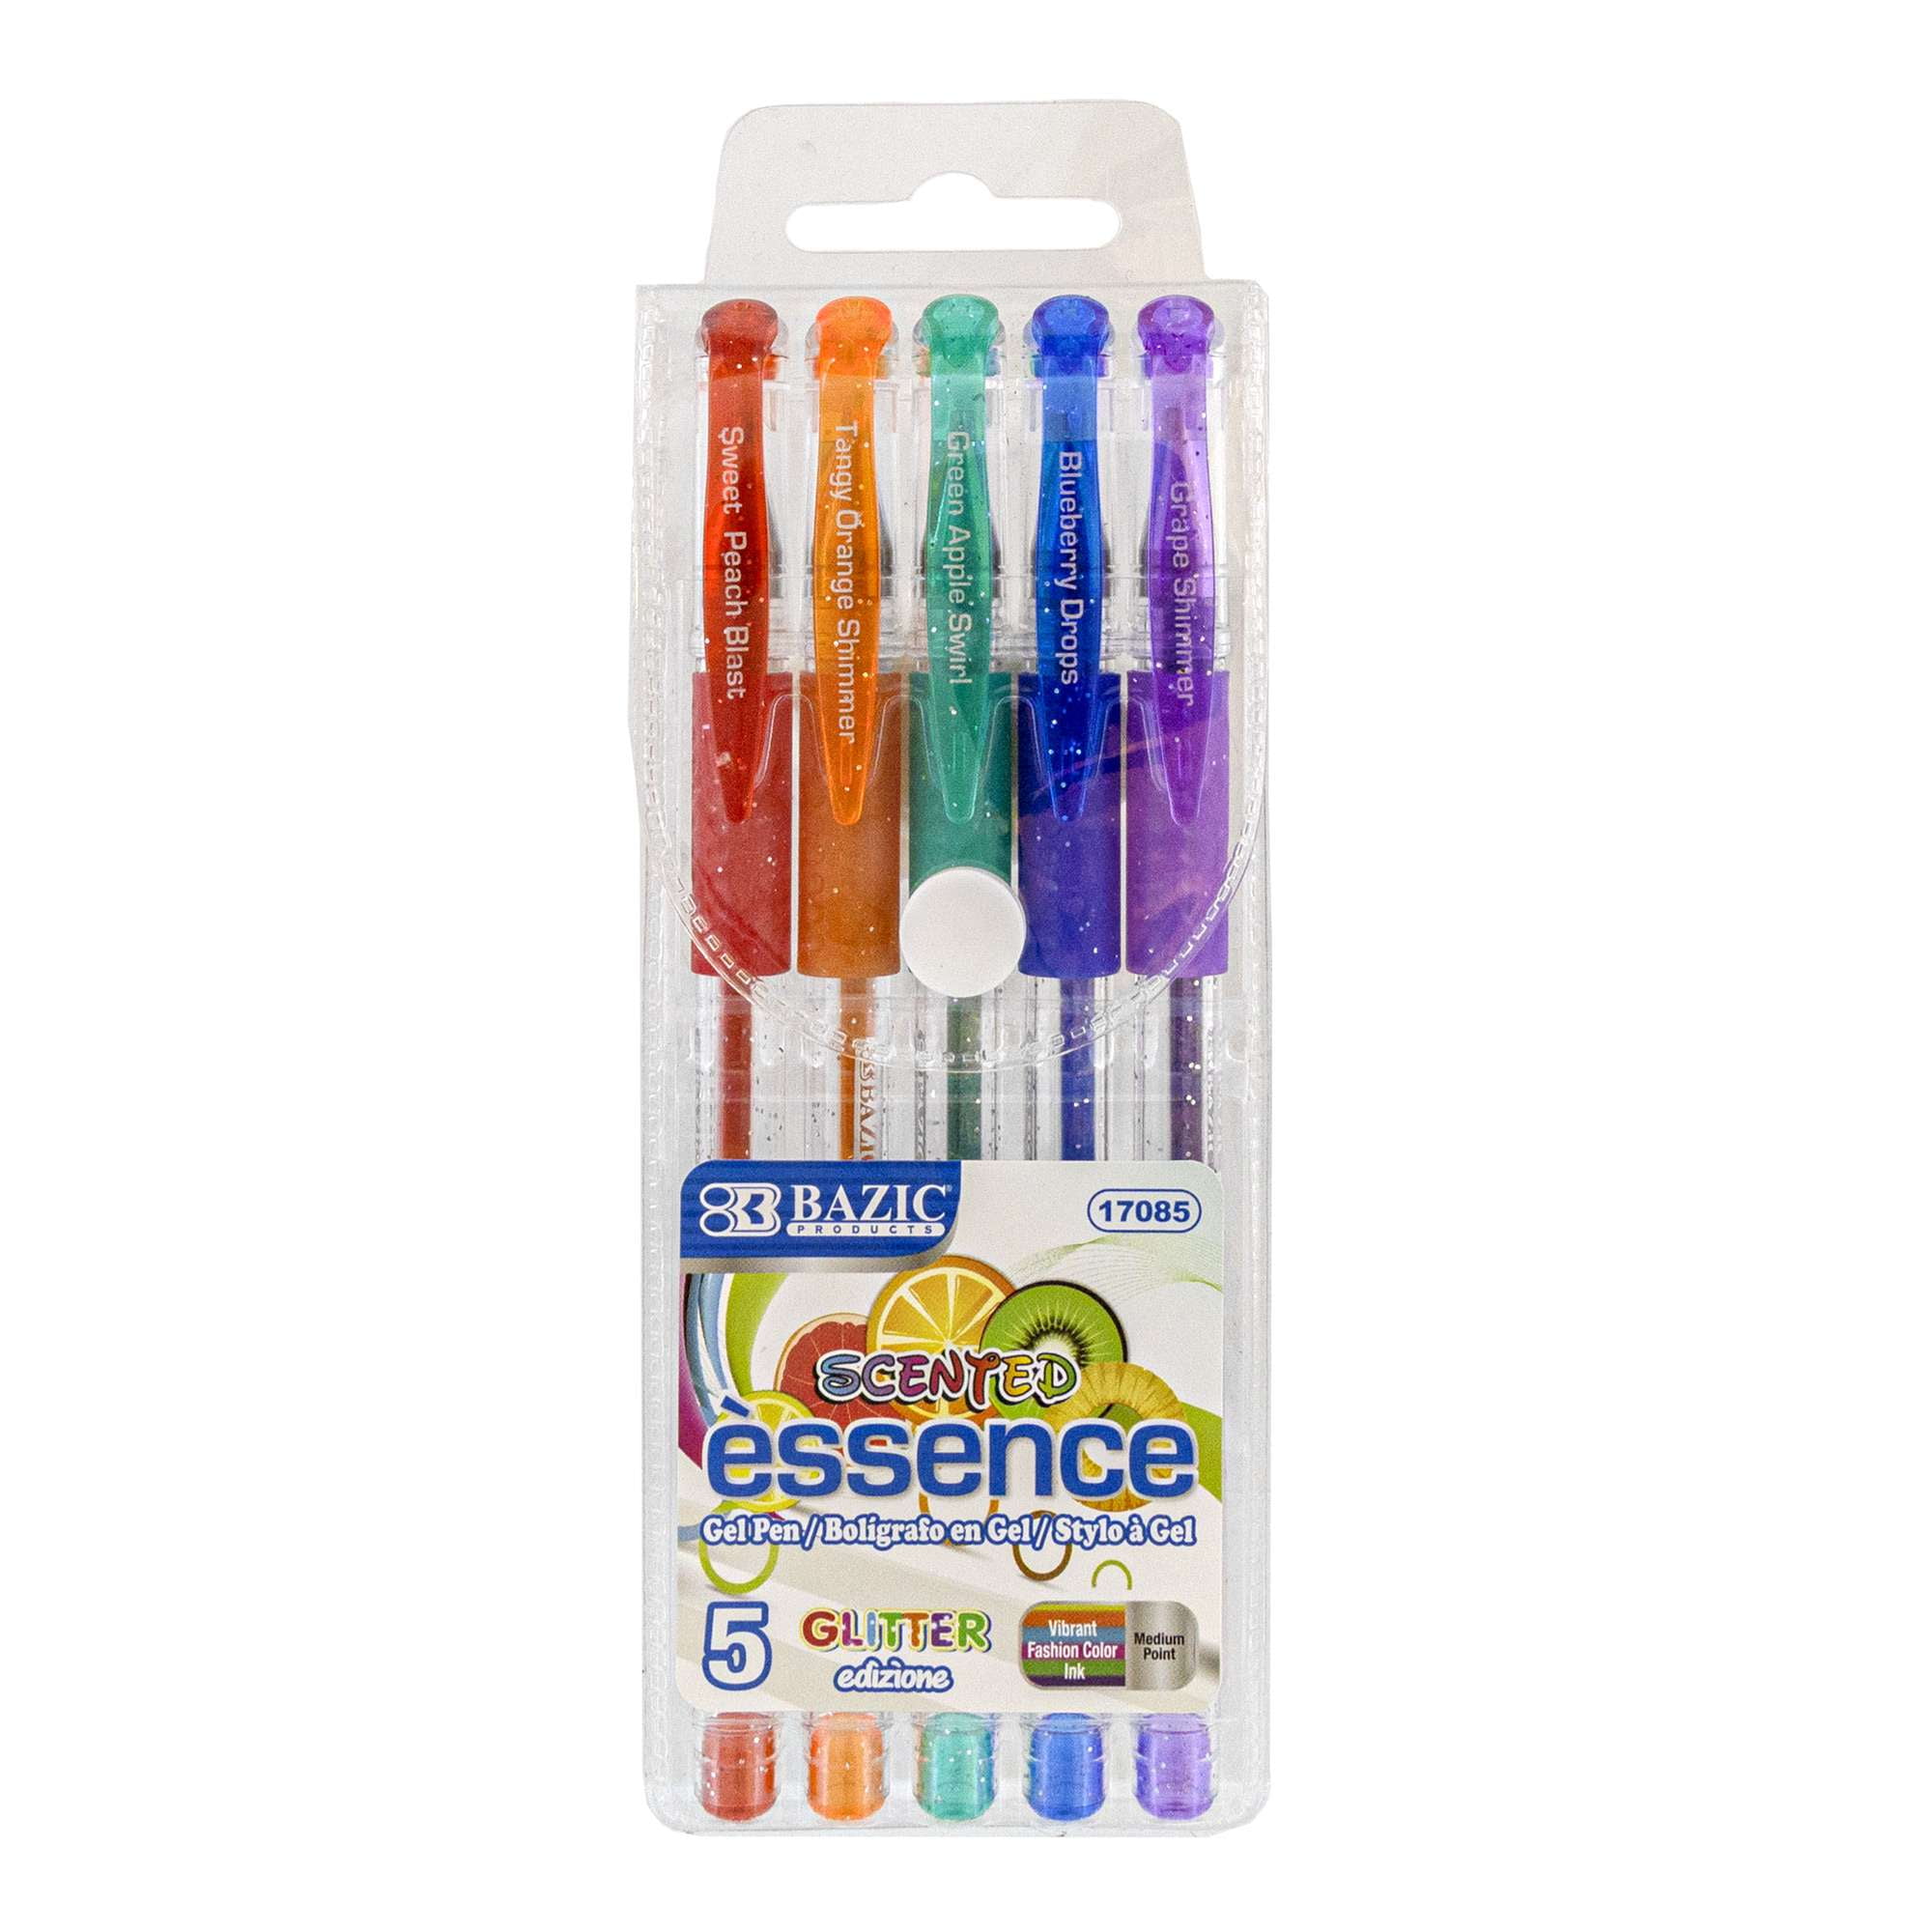 Water based Non-Toxic Safe Smooth BAZIC 6 Fruit Scented Glitter Color Gel Pen 